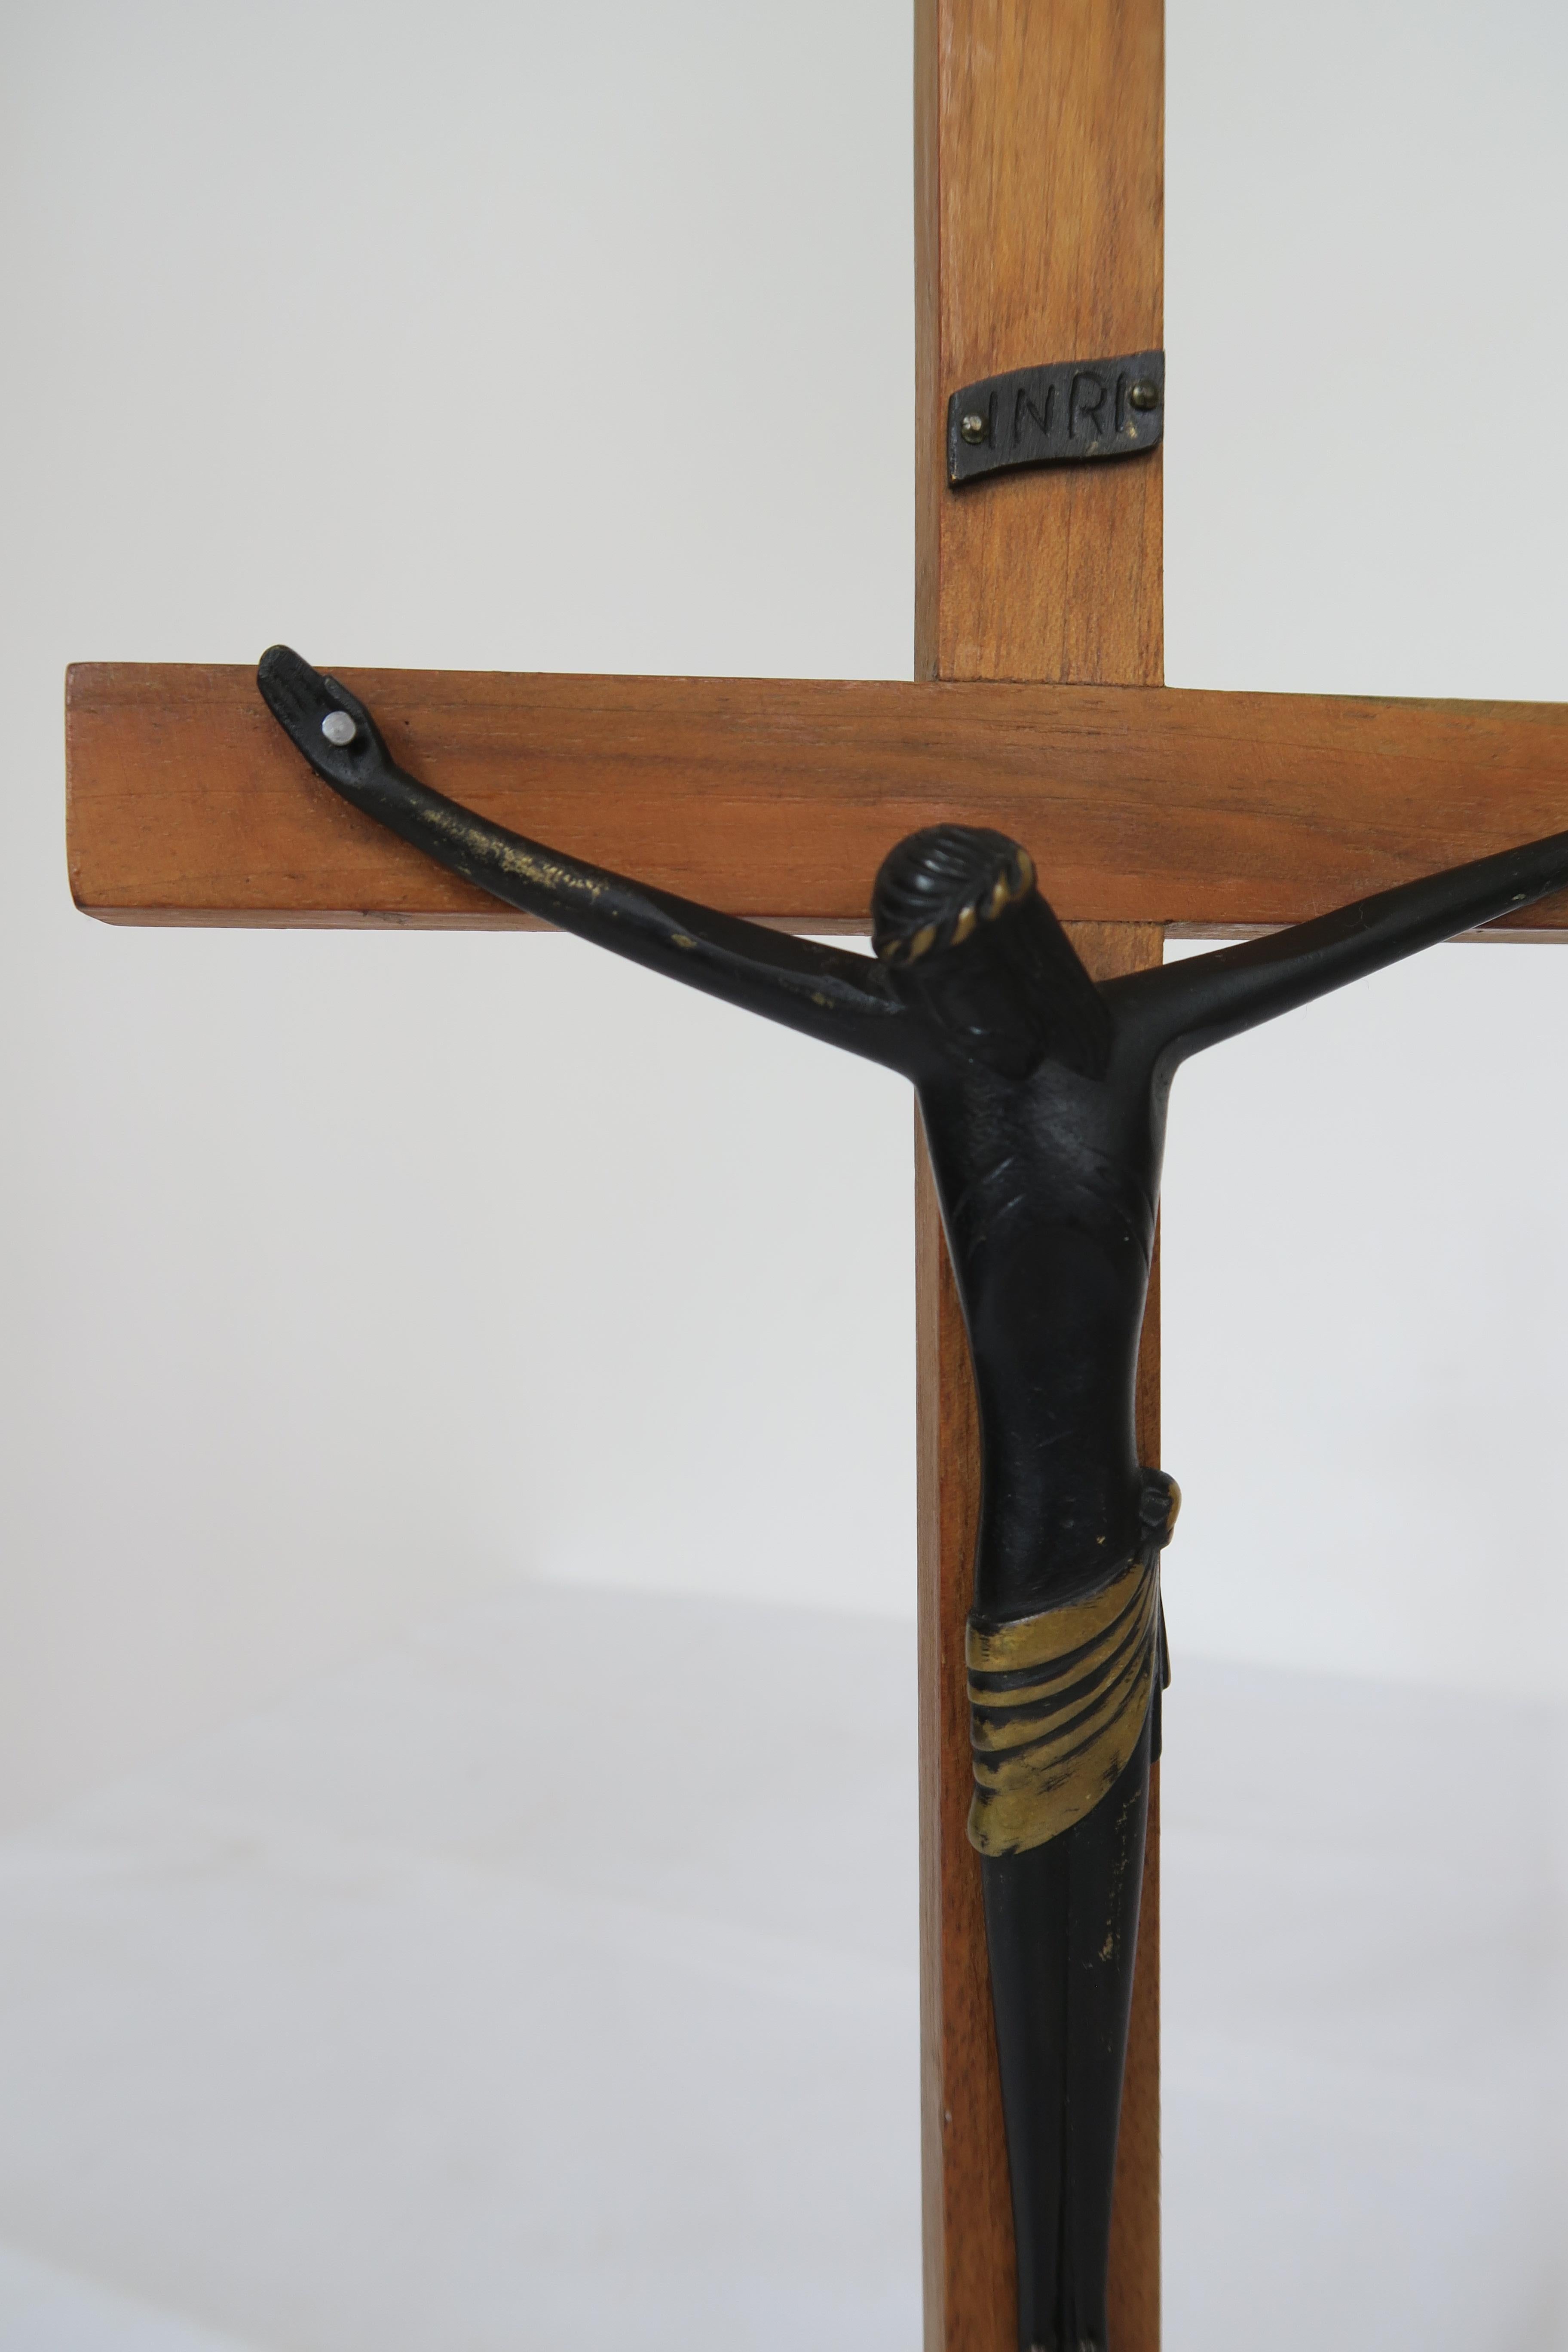 For sale is a Mid-Century Jesus fetish by Austrian Werkstätte Hagenauer Wien. The cross is made from beautiful, warm-toned nutwood and slightly varnished. The Jesus figurine is made from sooted brass and is a deep saturated black. Only his wreath